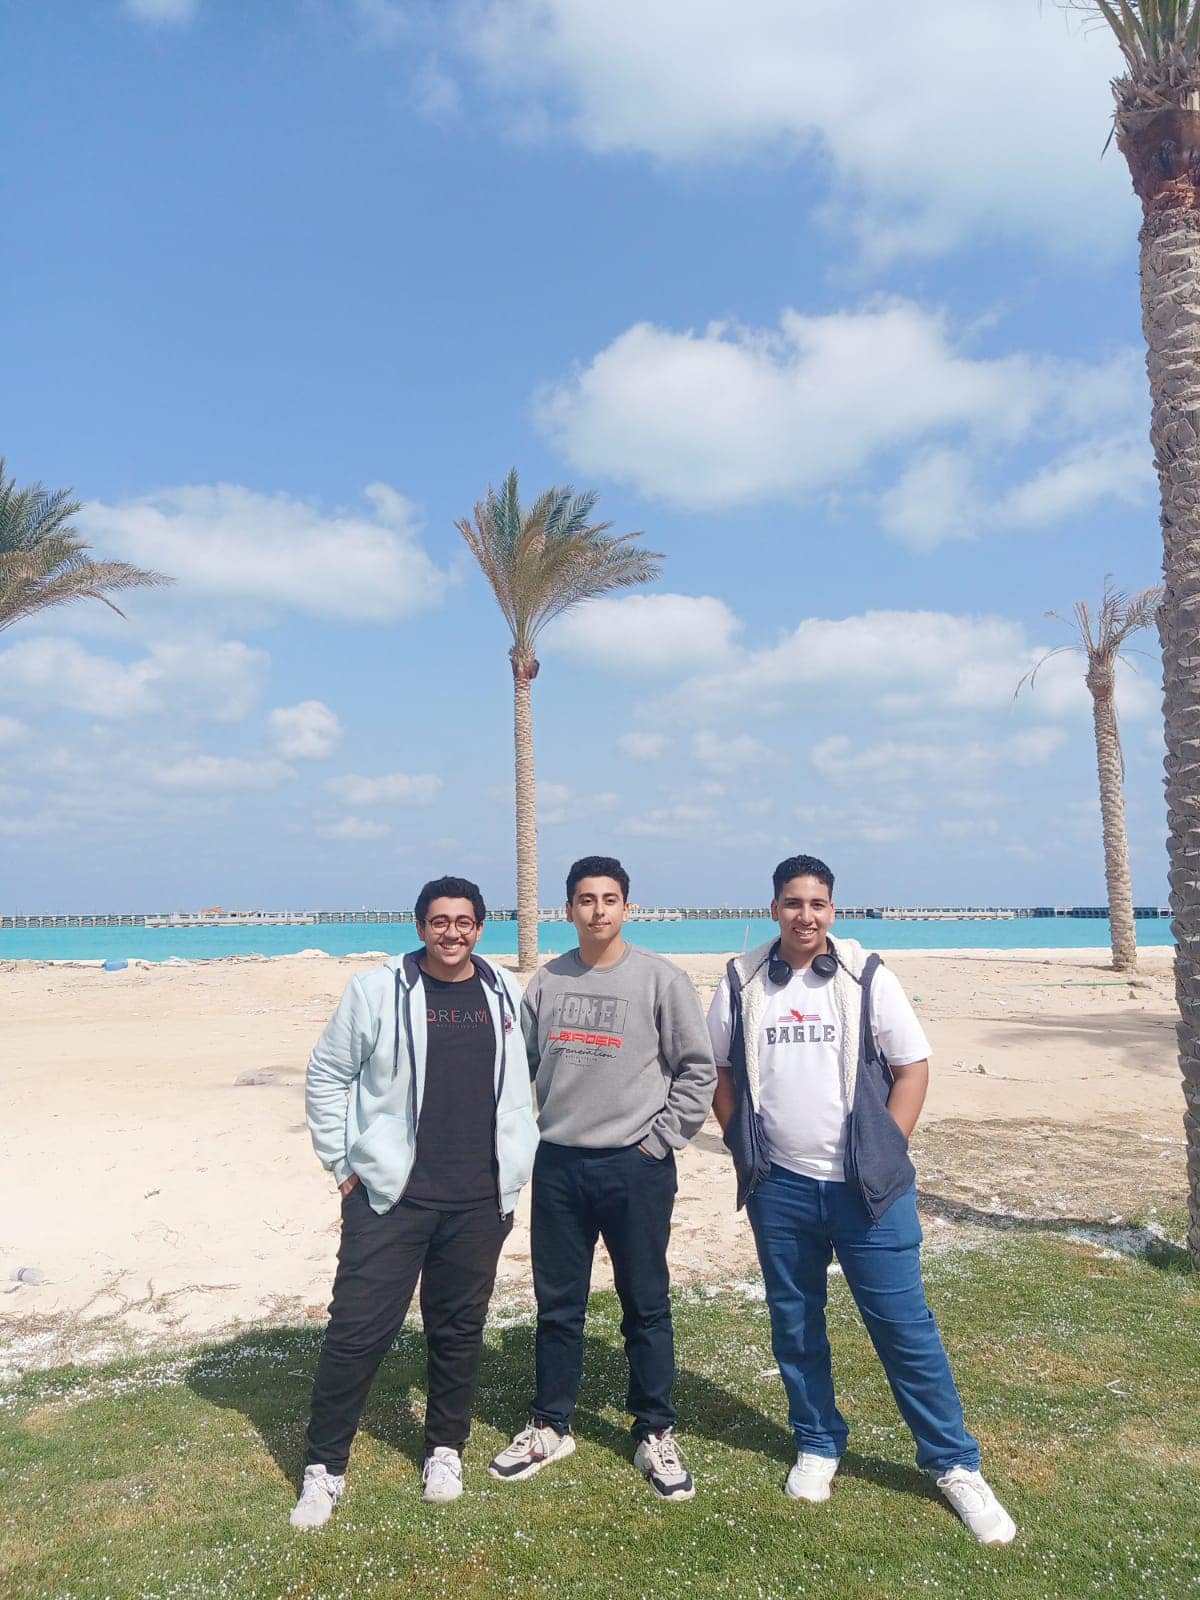 An entertaining visit for some new students to the new city of El Alamein